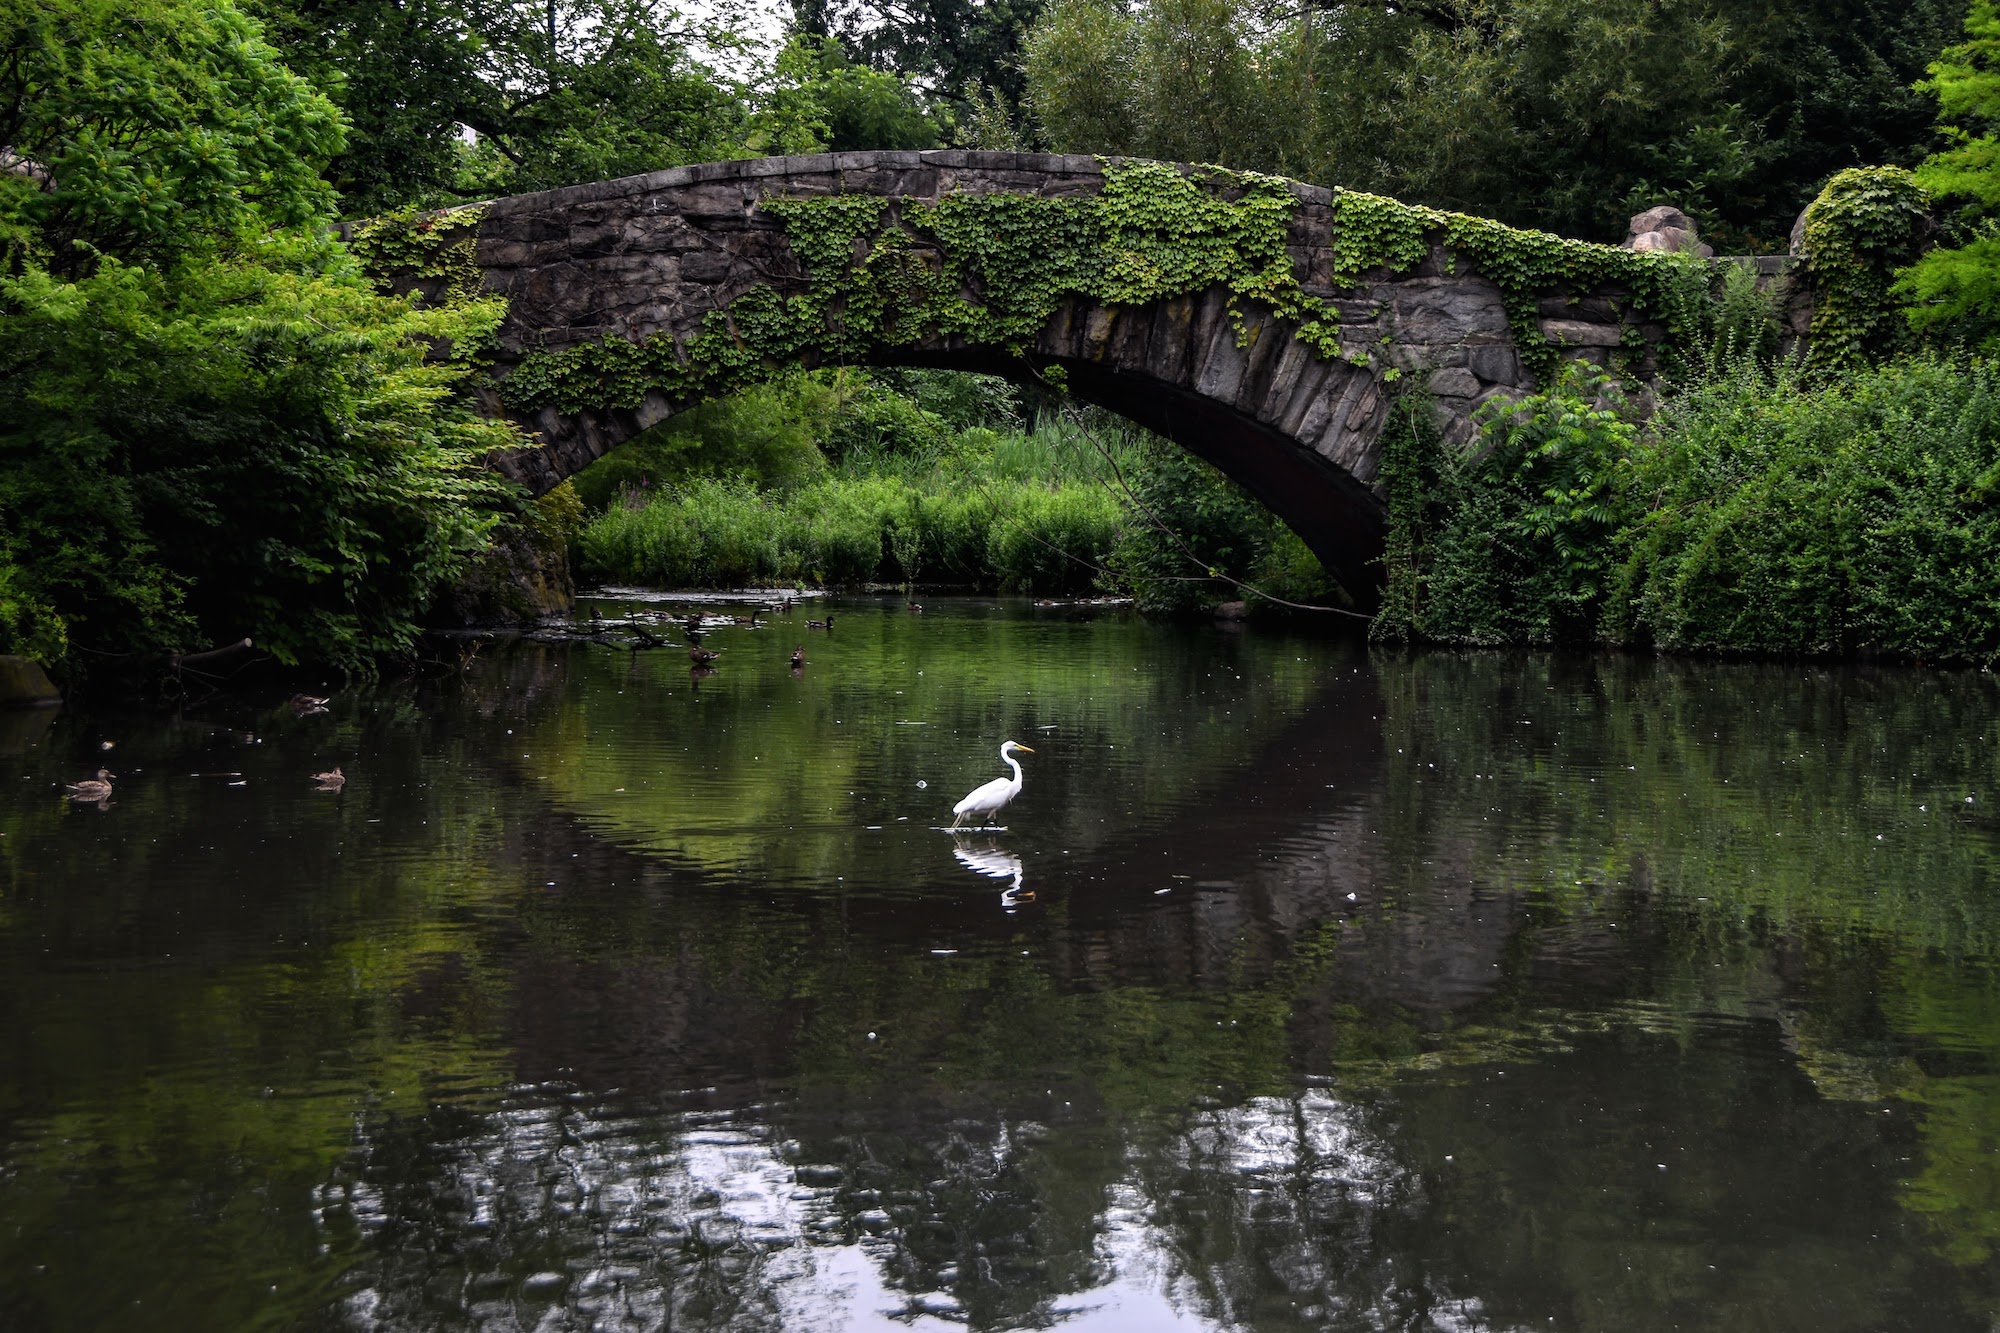 A Great Egret forages with waterfowl in the Pond, by the Gapstow Bridge. Photo: <a href=\"https://www.flickr.com/photos/larrycloss/\" target=\"_blank\">Larry Closs</a>